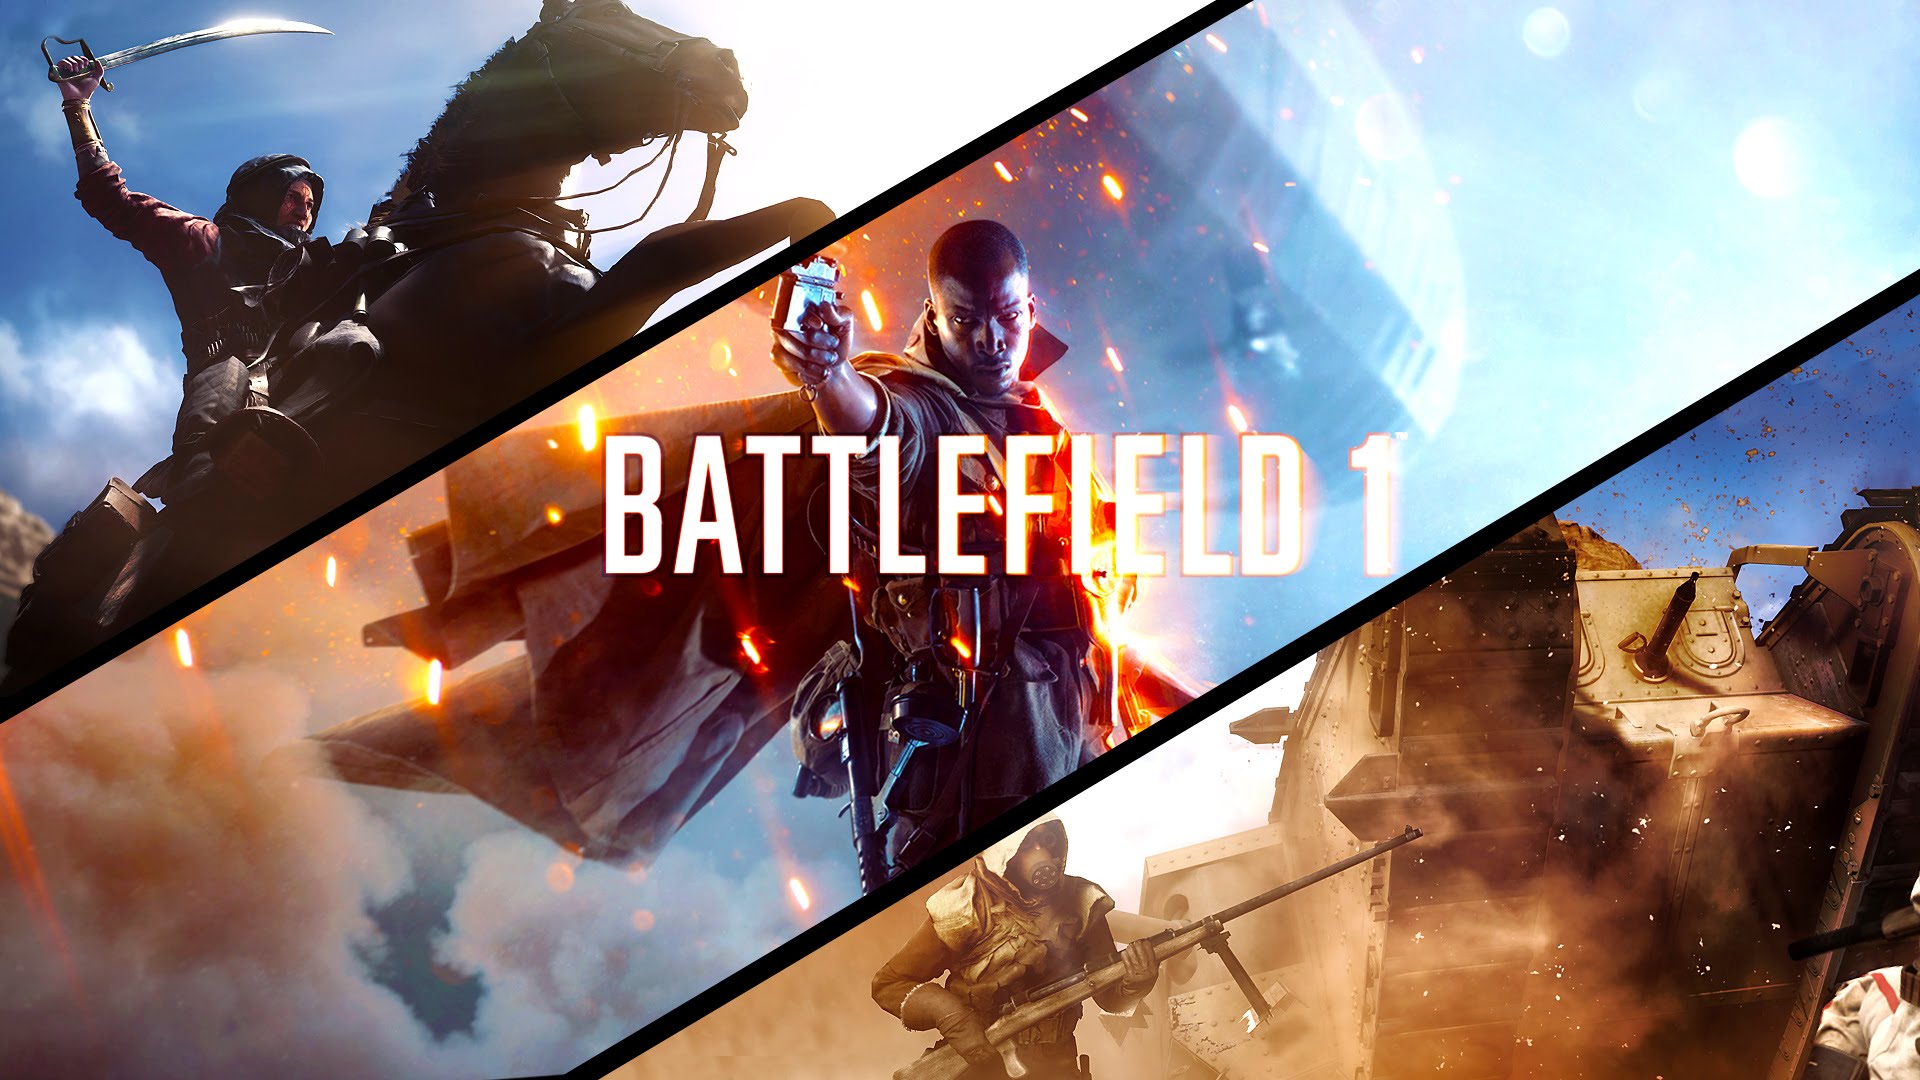 Battlefield 1 coming soon for Xbox One and PS4, PlayNTrade, Garner